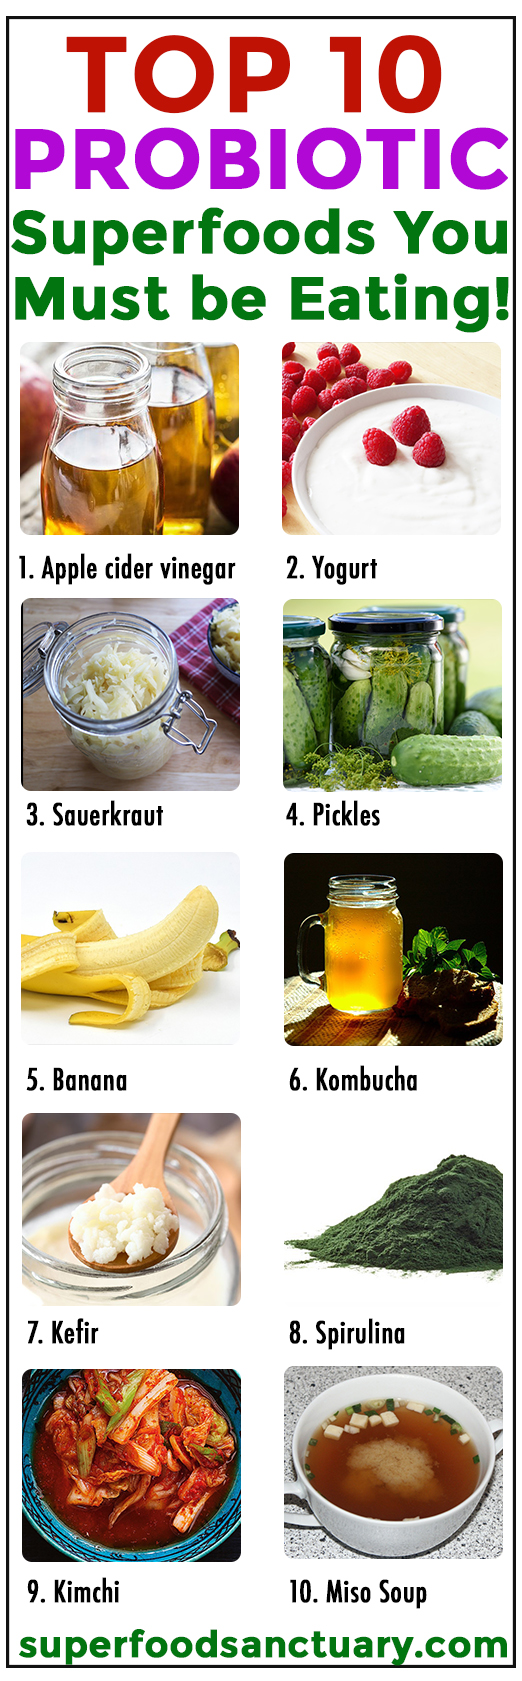 Probiotics are your gateway to a healthier you. In this article, check out the top 10 probiotic superfoods that you must be eating every day!